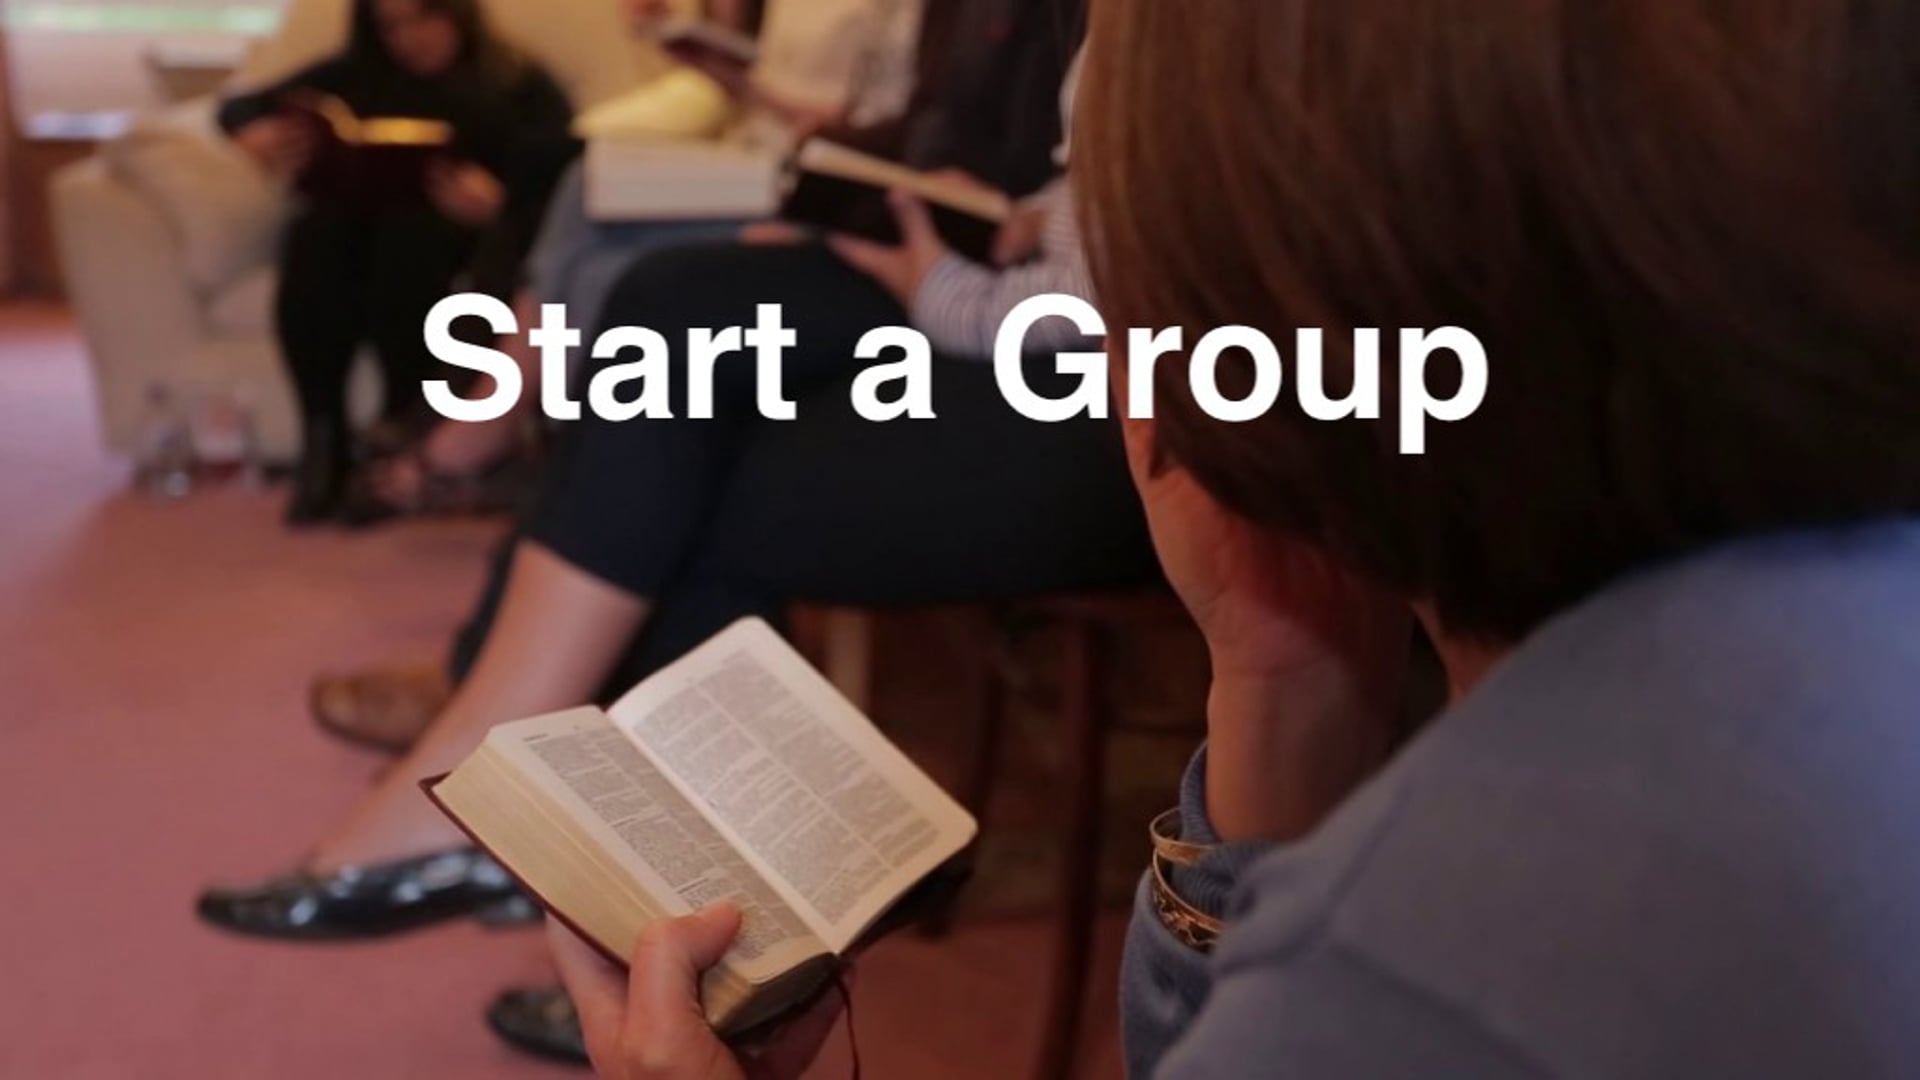 HOW TO START A GROUP